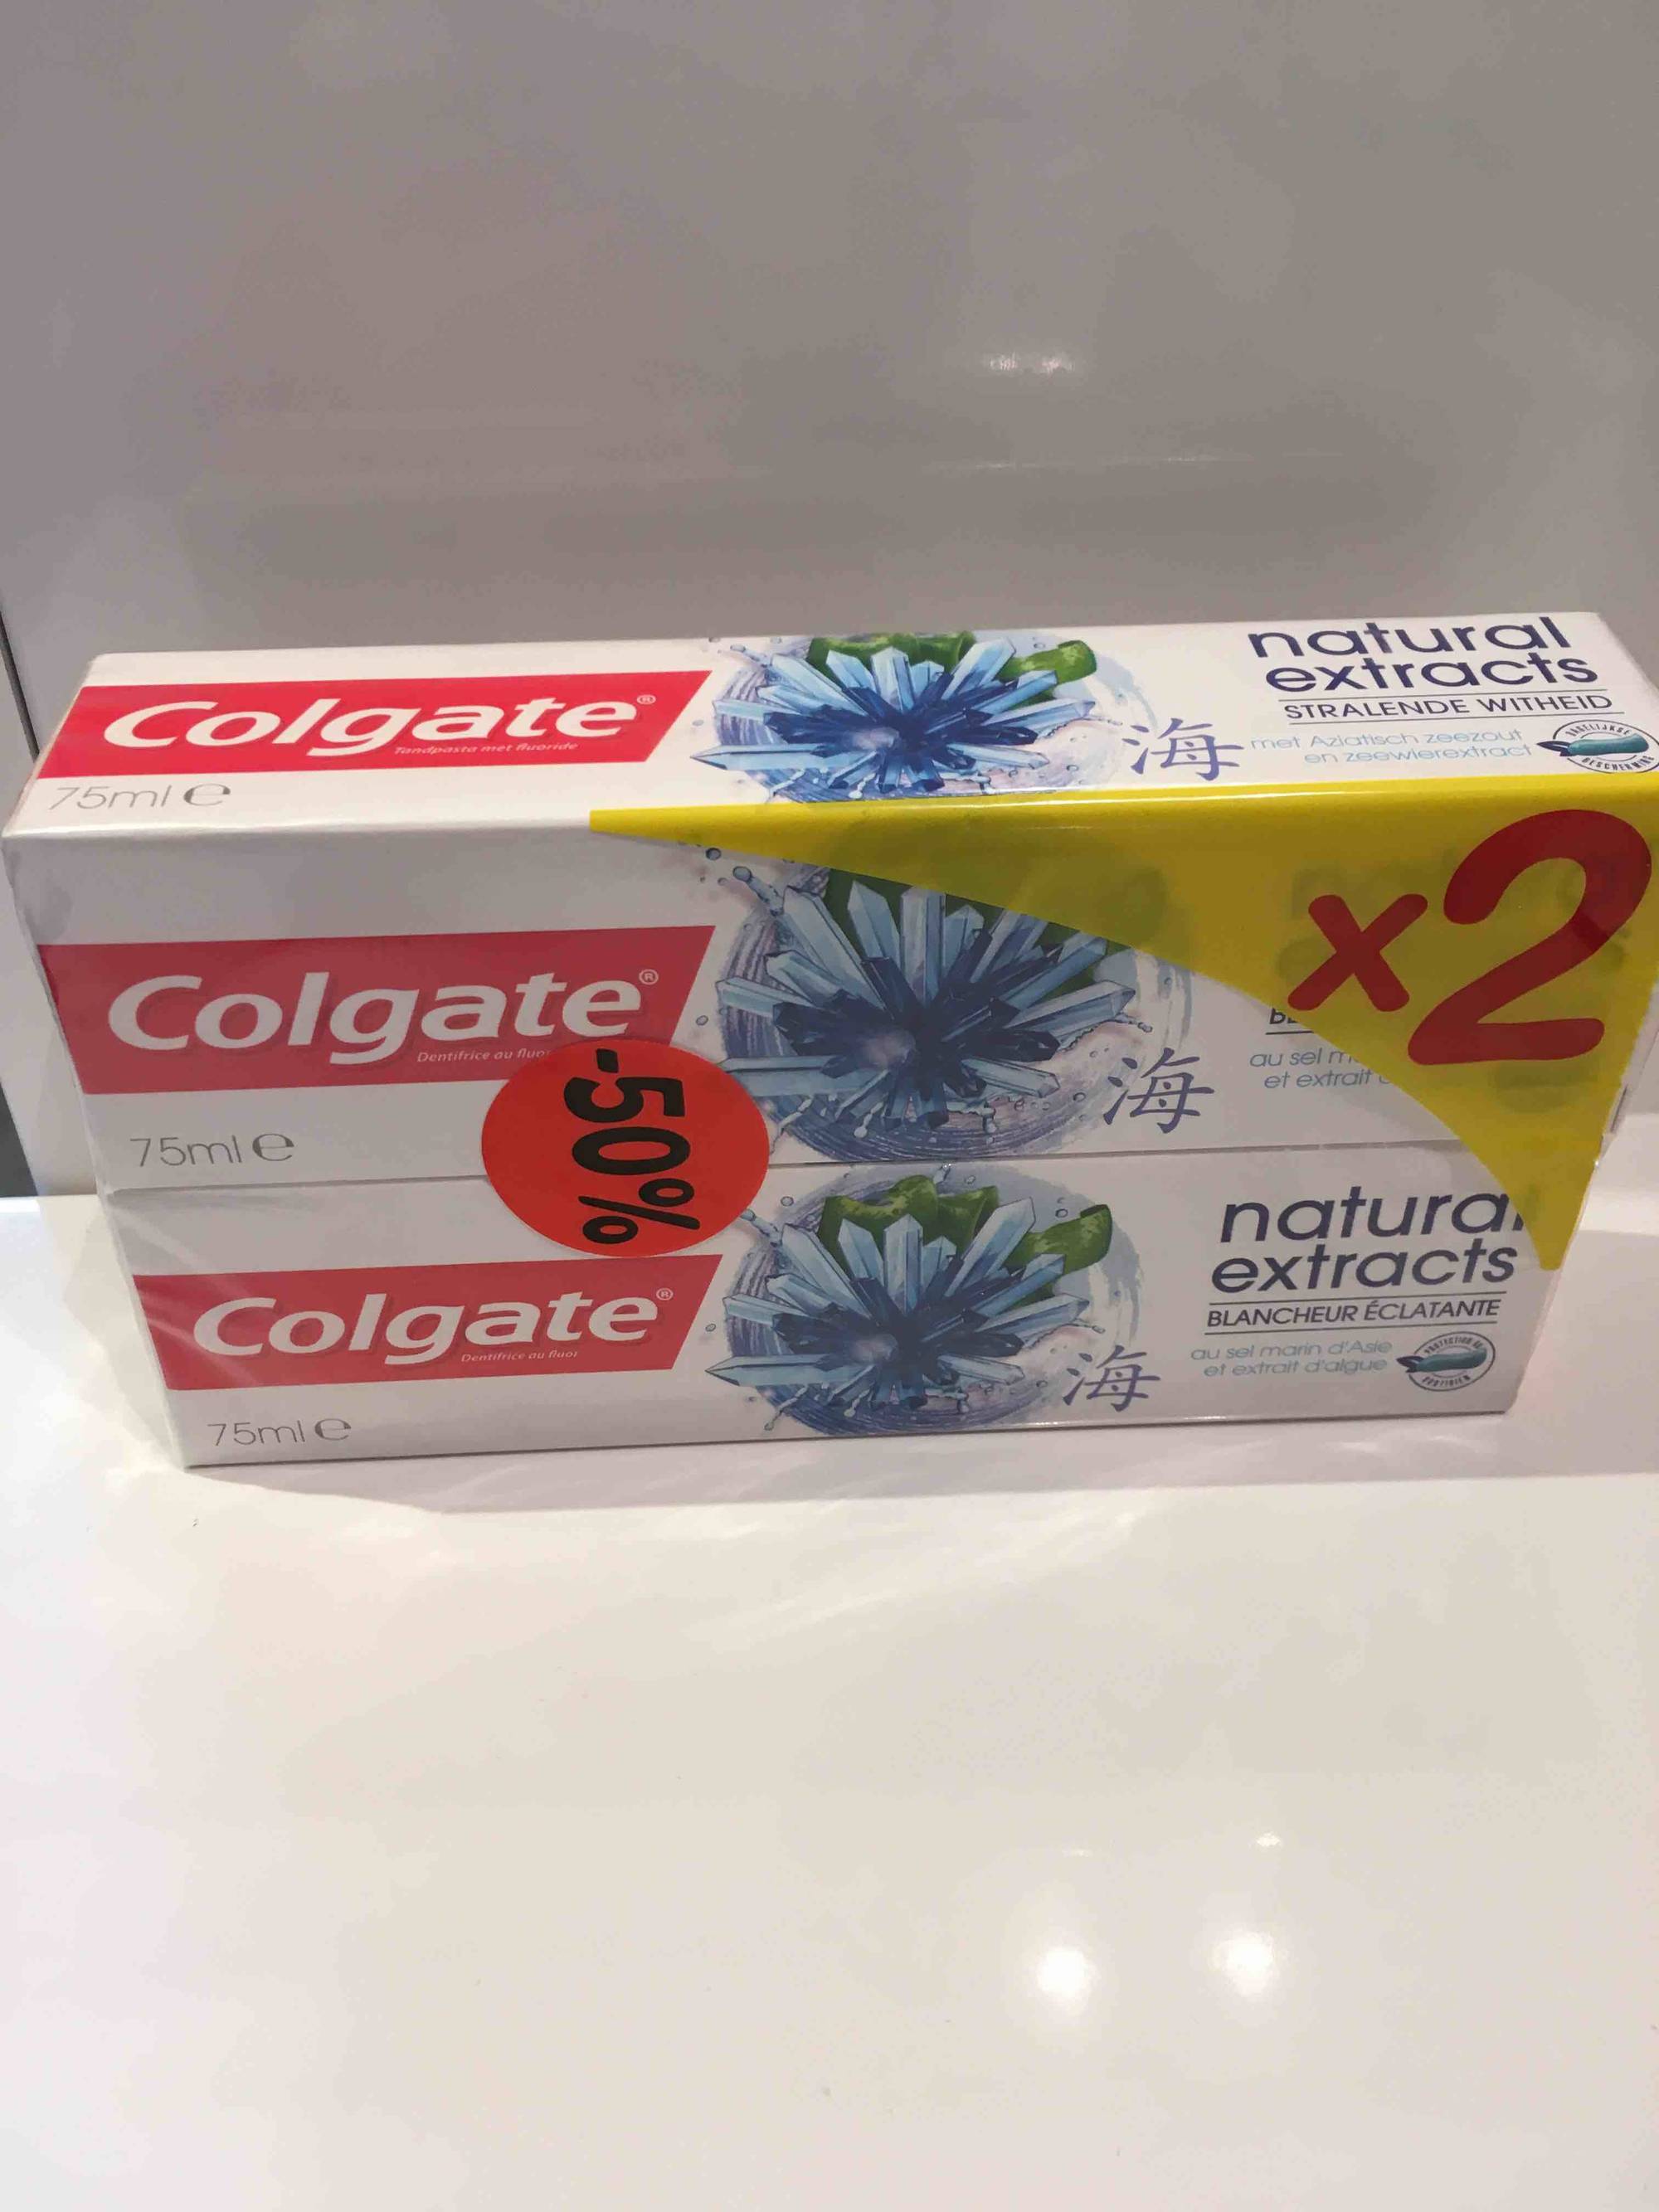 COLGATE - Natural extracts - Dentifrice blancheur éclatante